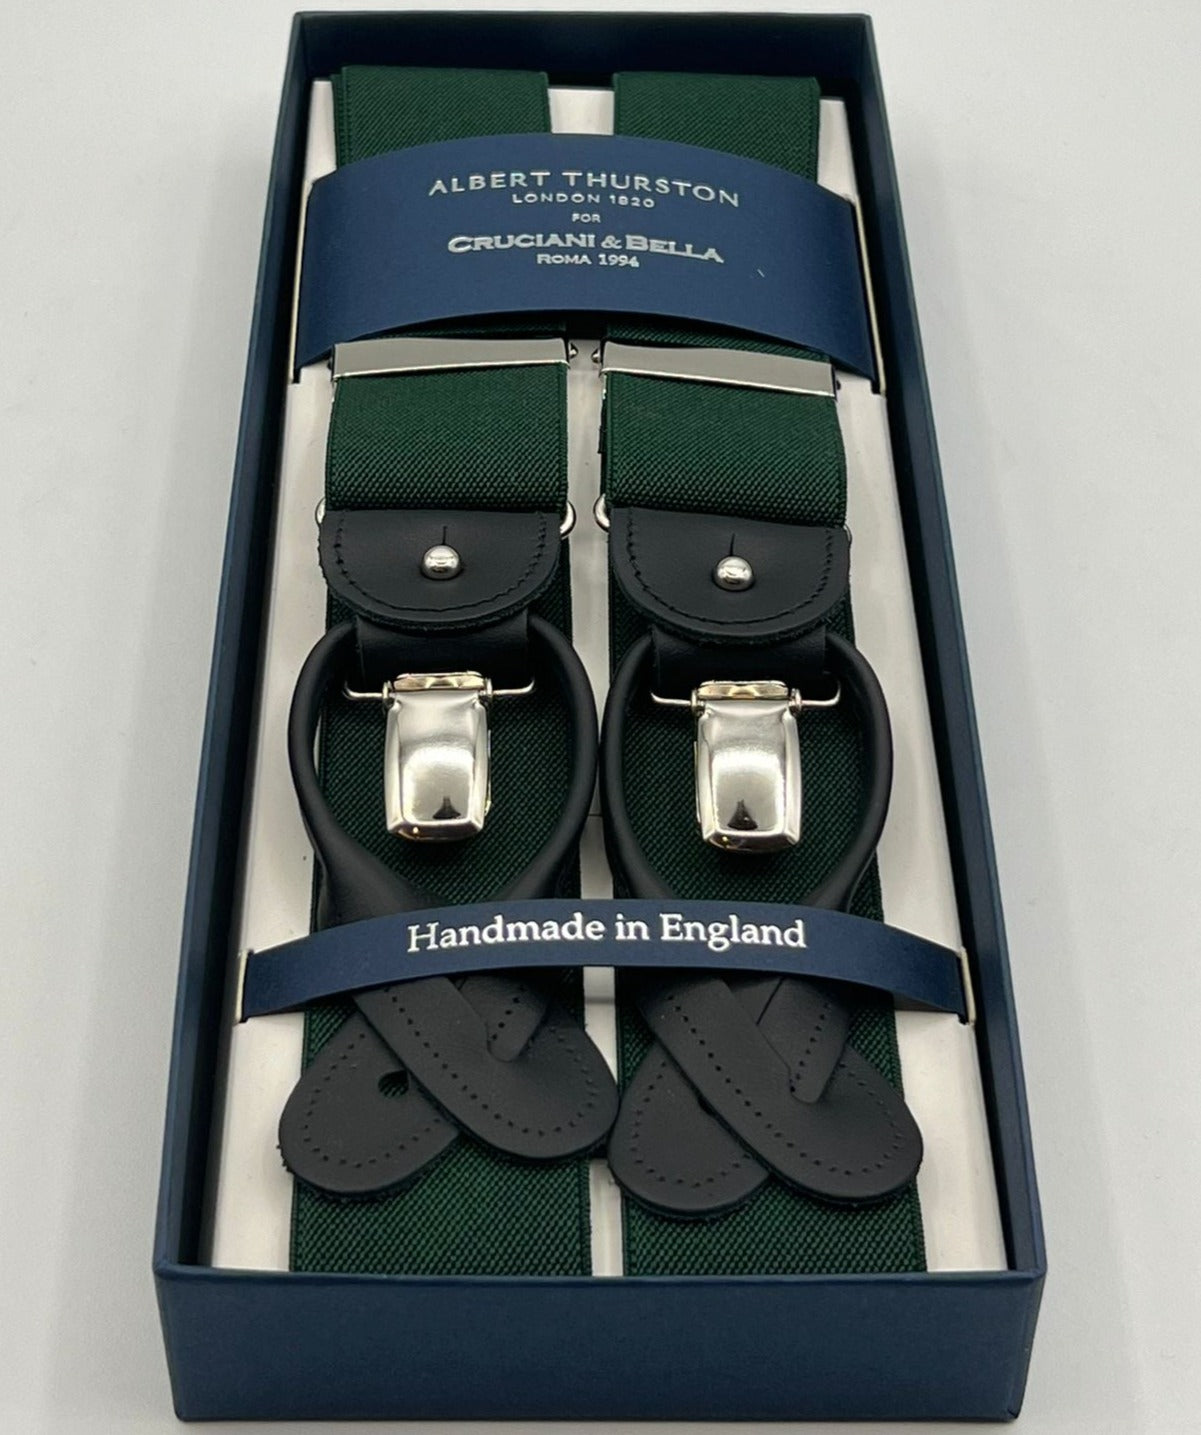 Albert Thurston for Cruciani & Bella Made in England 2 in 1 Adjustable Sizing 35 mm elastic braces Plain Bottle Green Y-Shaped Nickel Fittings Size MULTIFIT